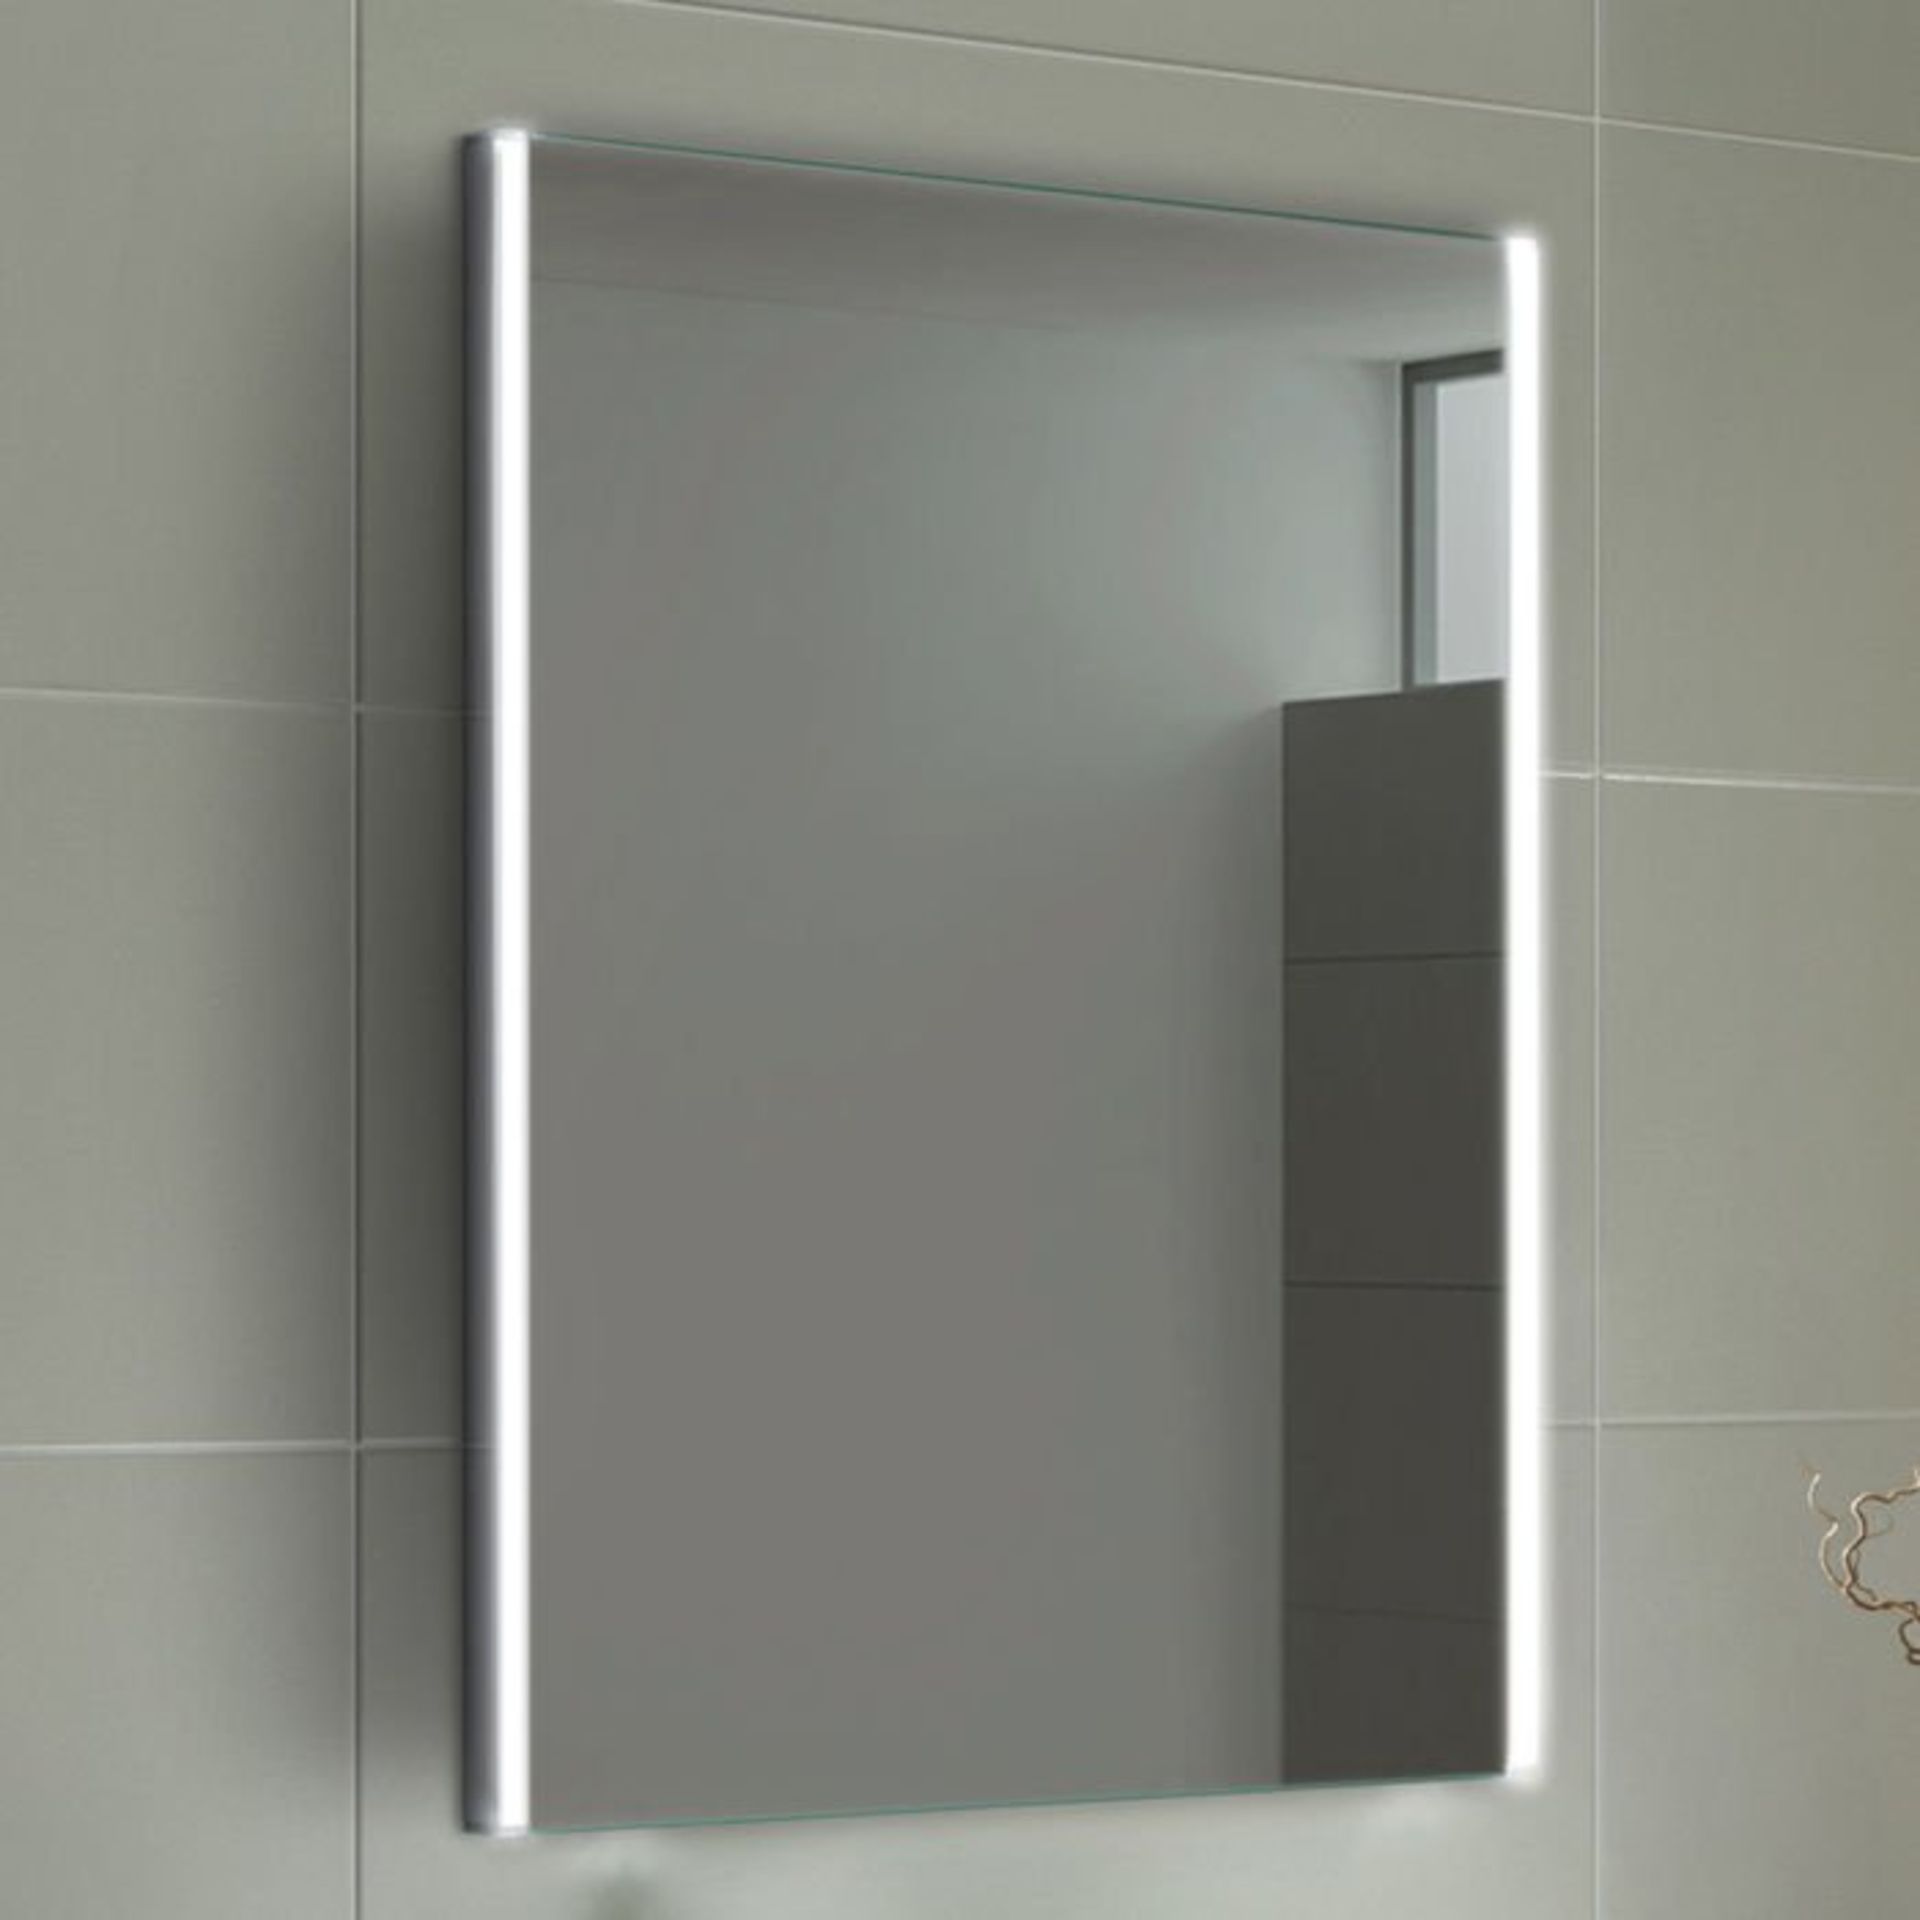 (G209) 700x500mm Lunar Illuminated LED Mirror - Switch Control. RRP £349.99. Energy efficient LED